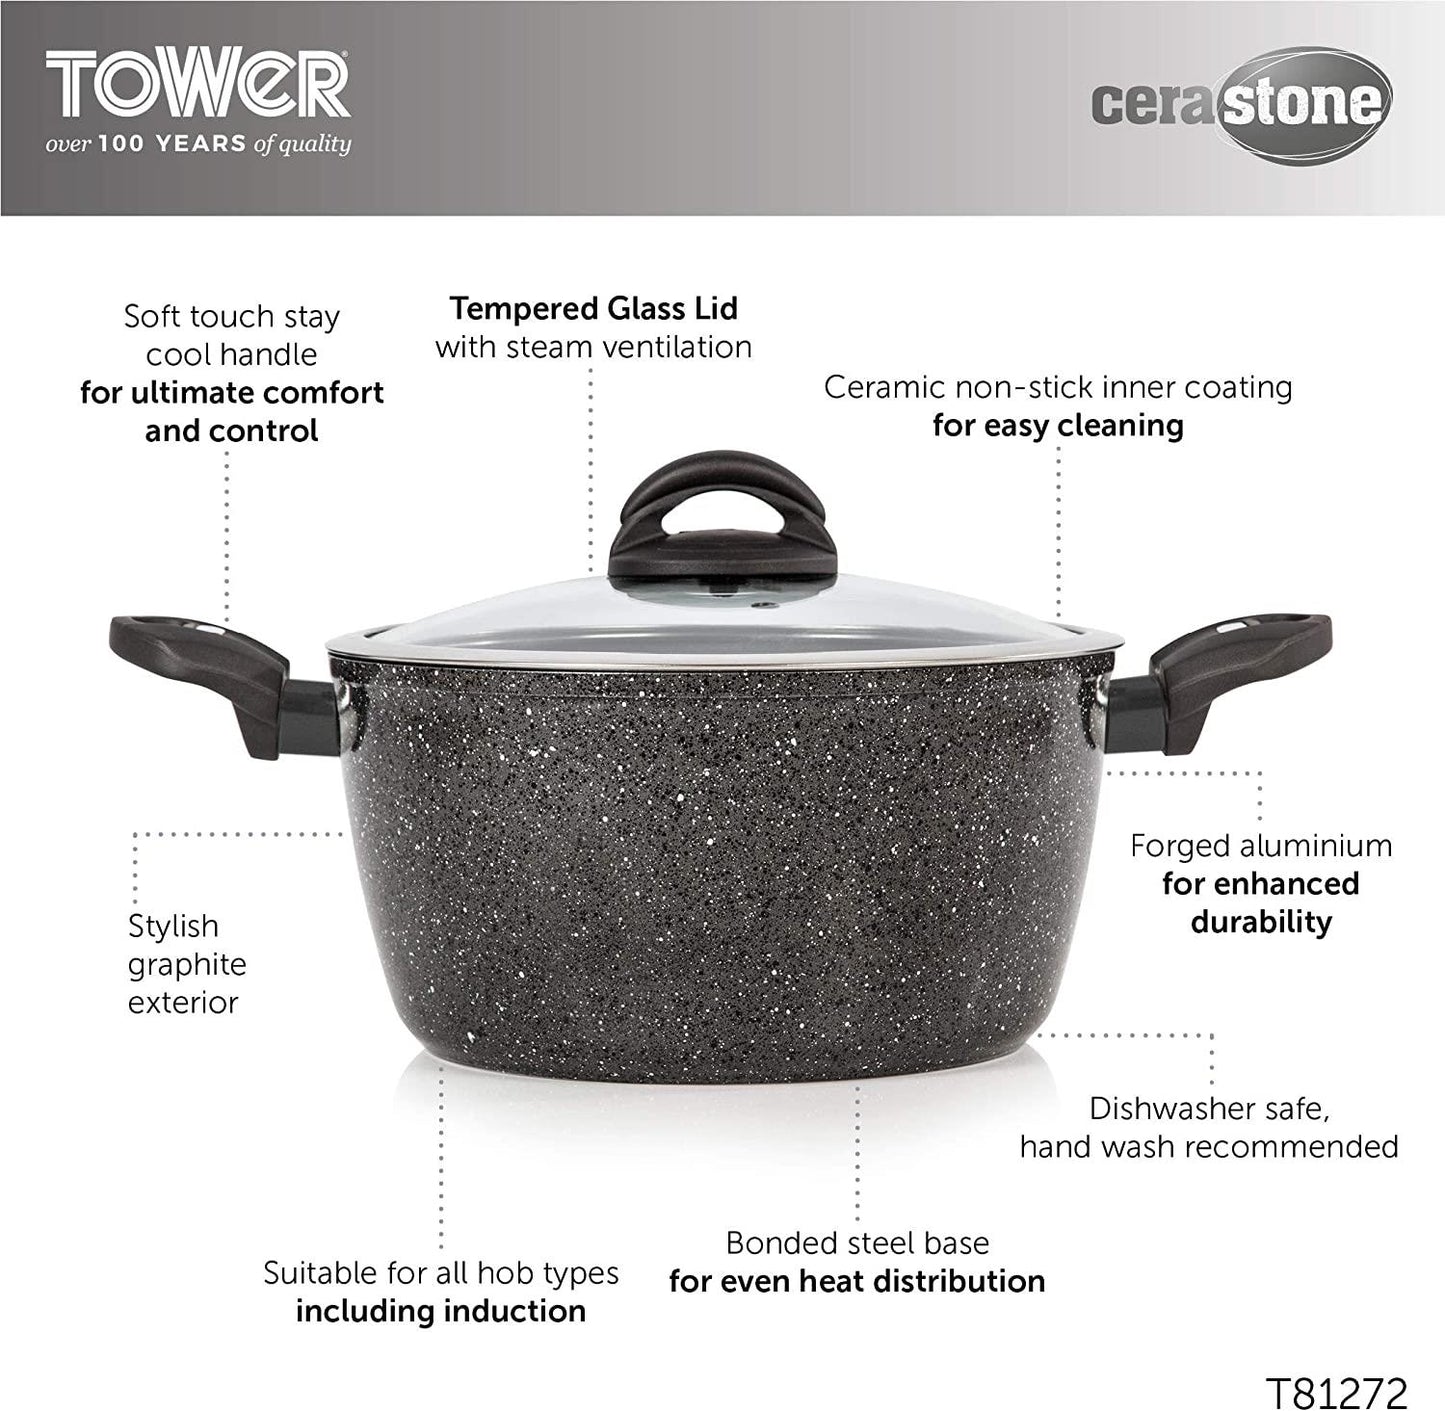 Tower 24cm Cerastone Induction Casserole Dish with Glass Lid- T81272